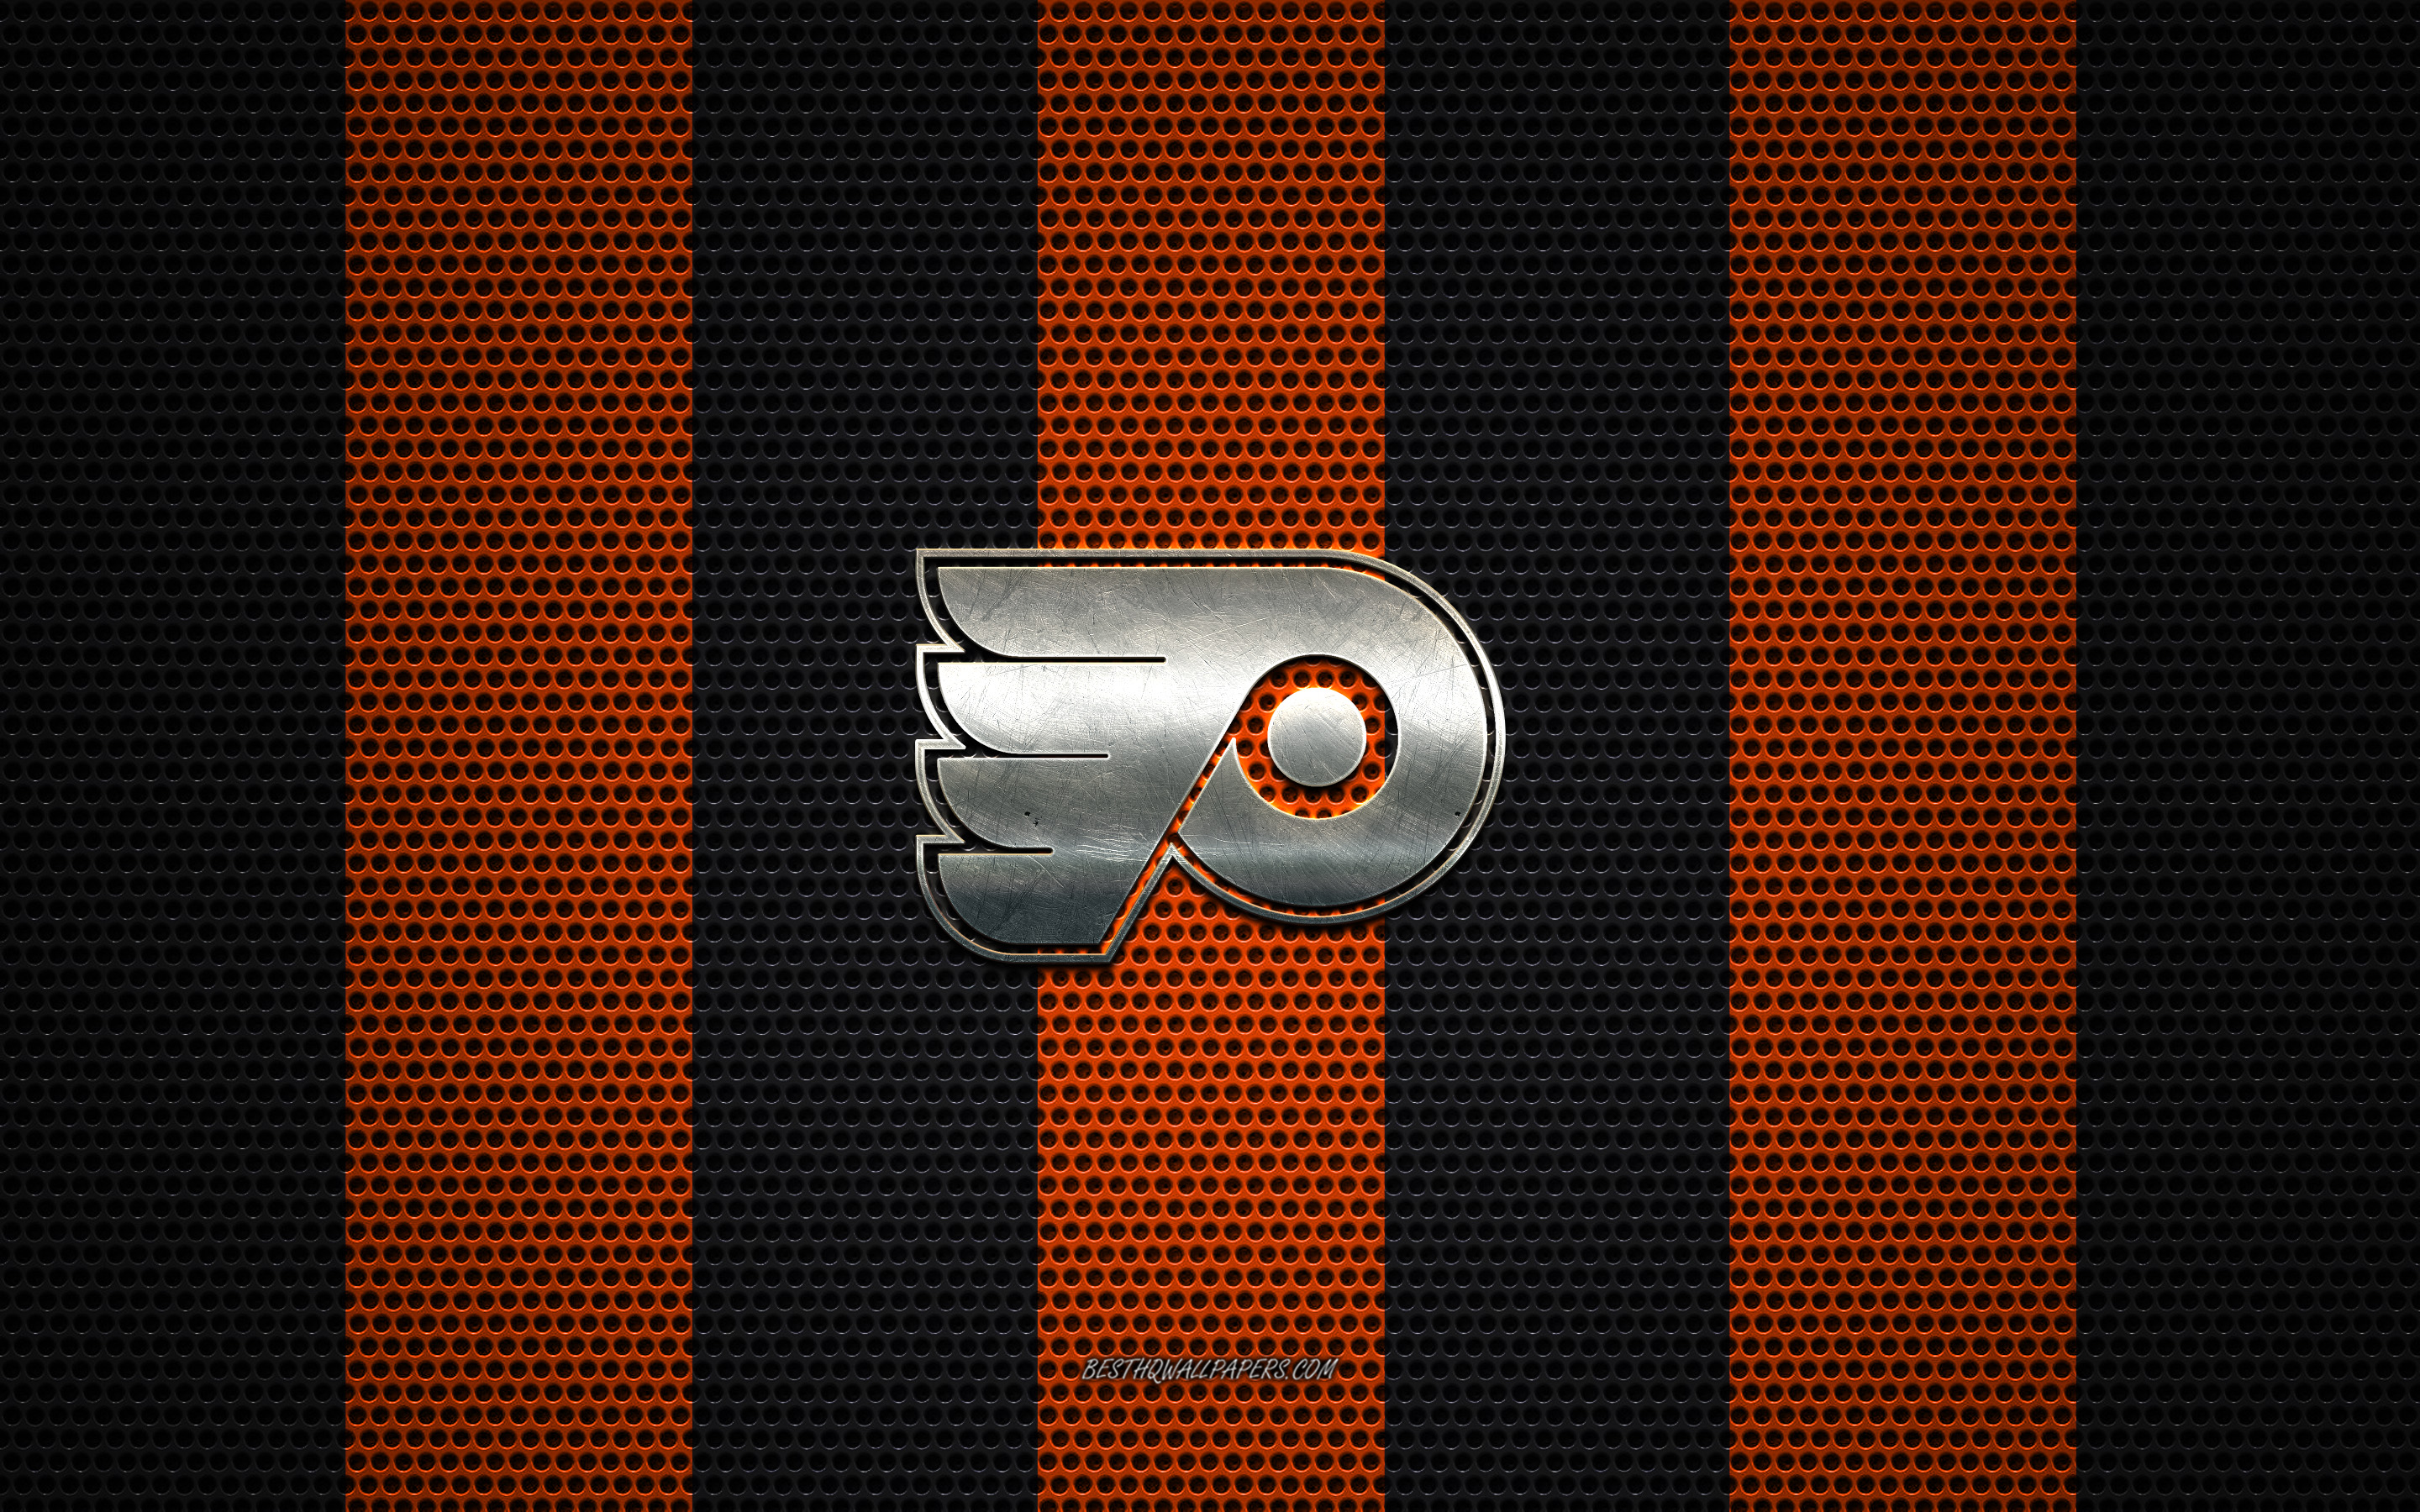 Flyers Logo Wallpapers